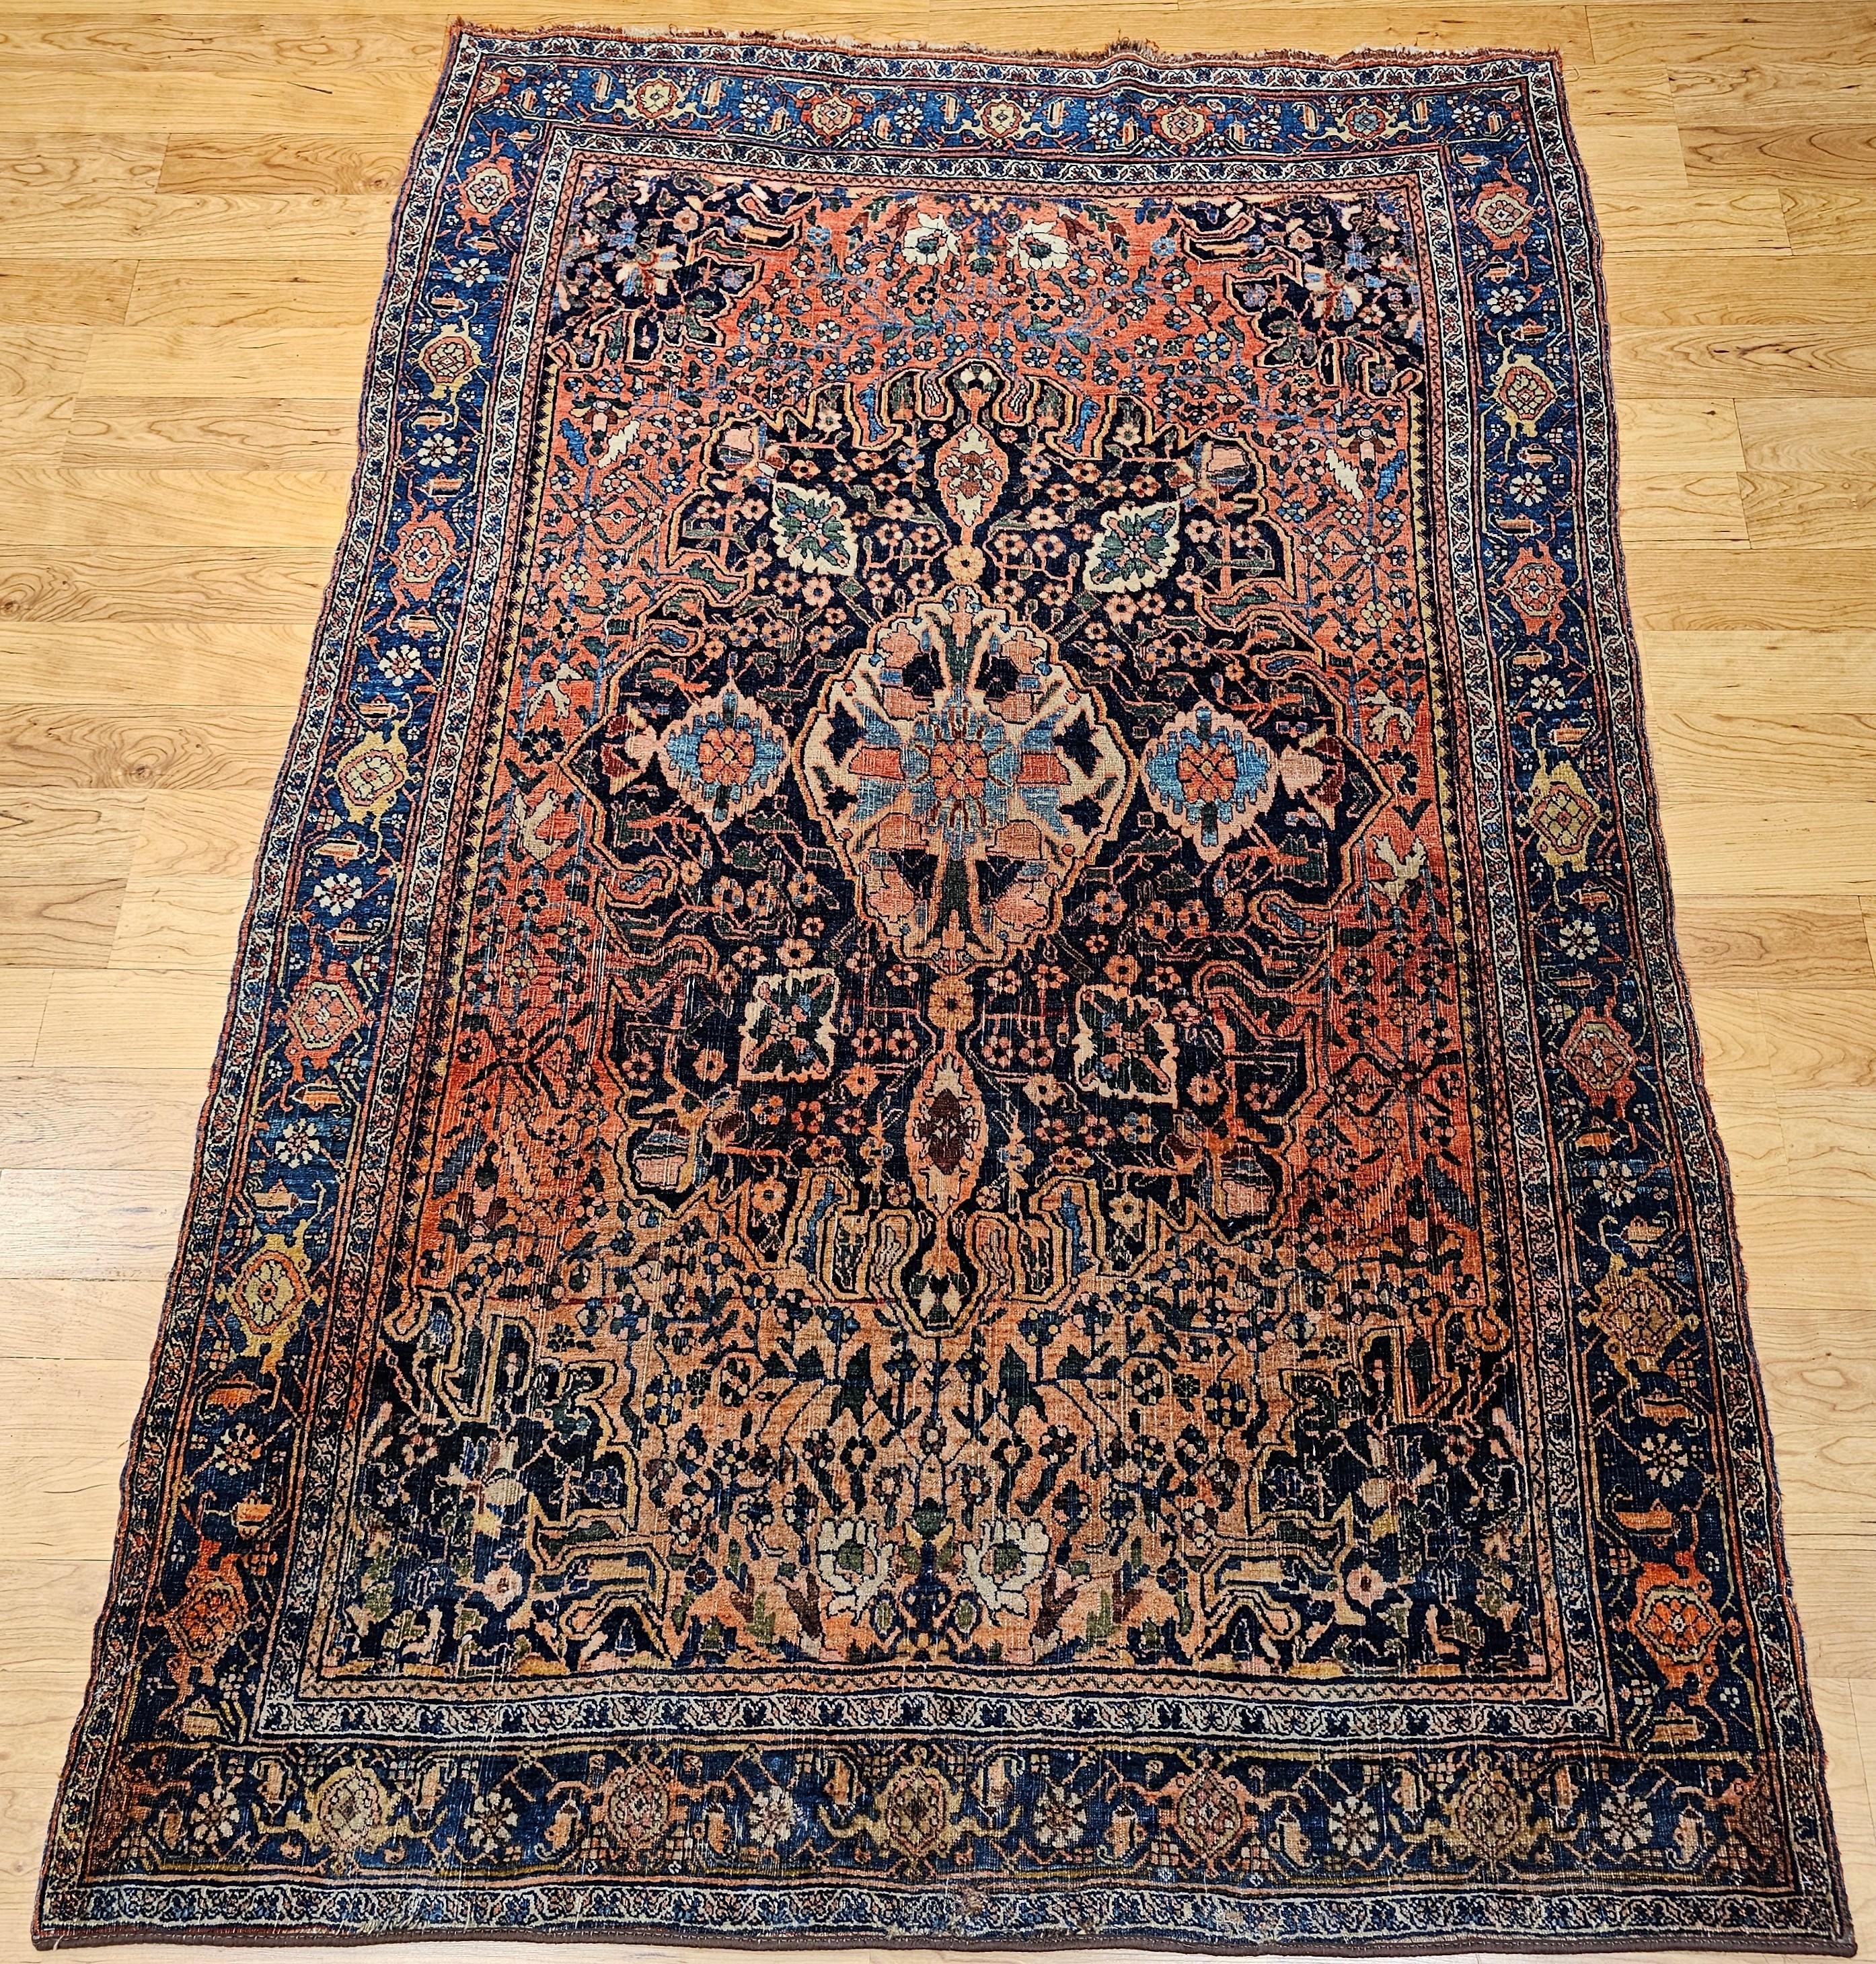 Early 20th century Persian Bidjar area rug with a medallion design in a floral geometric pattern in red, French blue, and navy blue, green, yellow colors.   The rug has a combination of an abrash French blue and rich red field colors.    The Bidjar